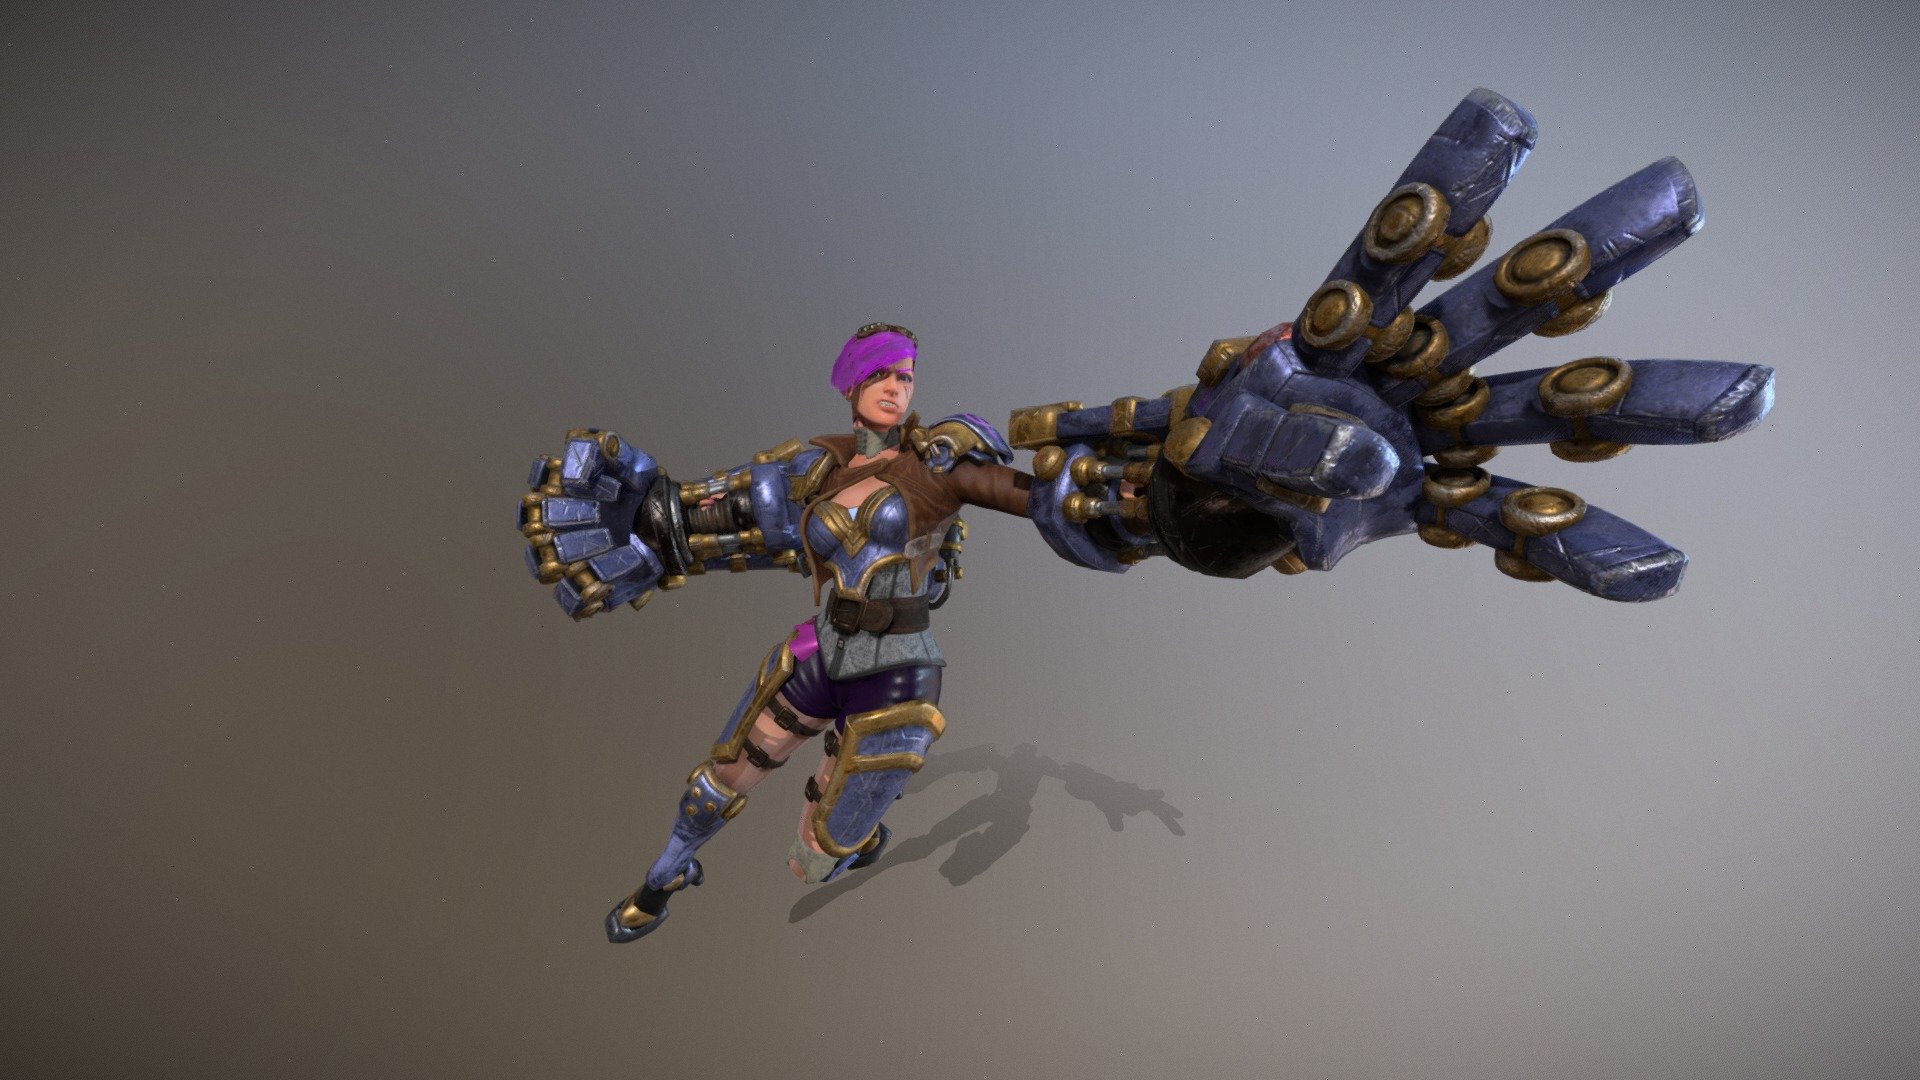 Model i made of Vi from league of legends. 

Made in Blender with a few custom shaders, rigged with rigiffy (for the body and clothes) and a simple rigg for the atlas gauntlets to control wirst and finger movement. The model has PBR materials and each part of the clothes and accesories is a individual mesh that can be turned on or with 2K textures

The file contains the .Blend file with the rigged model for you to use as you please - Vi (Rigged with riggify) - Buy Royalty Free 3D model by Woophy (@woophy101) 3d model